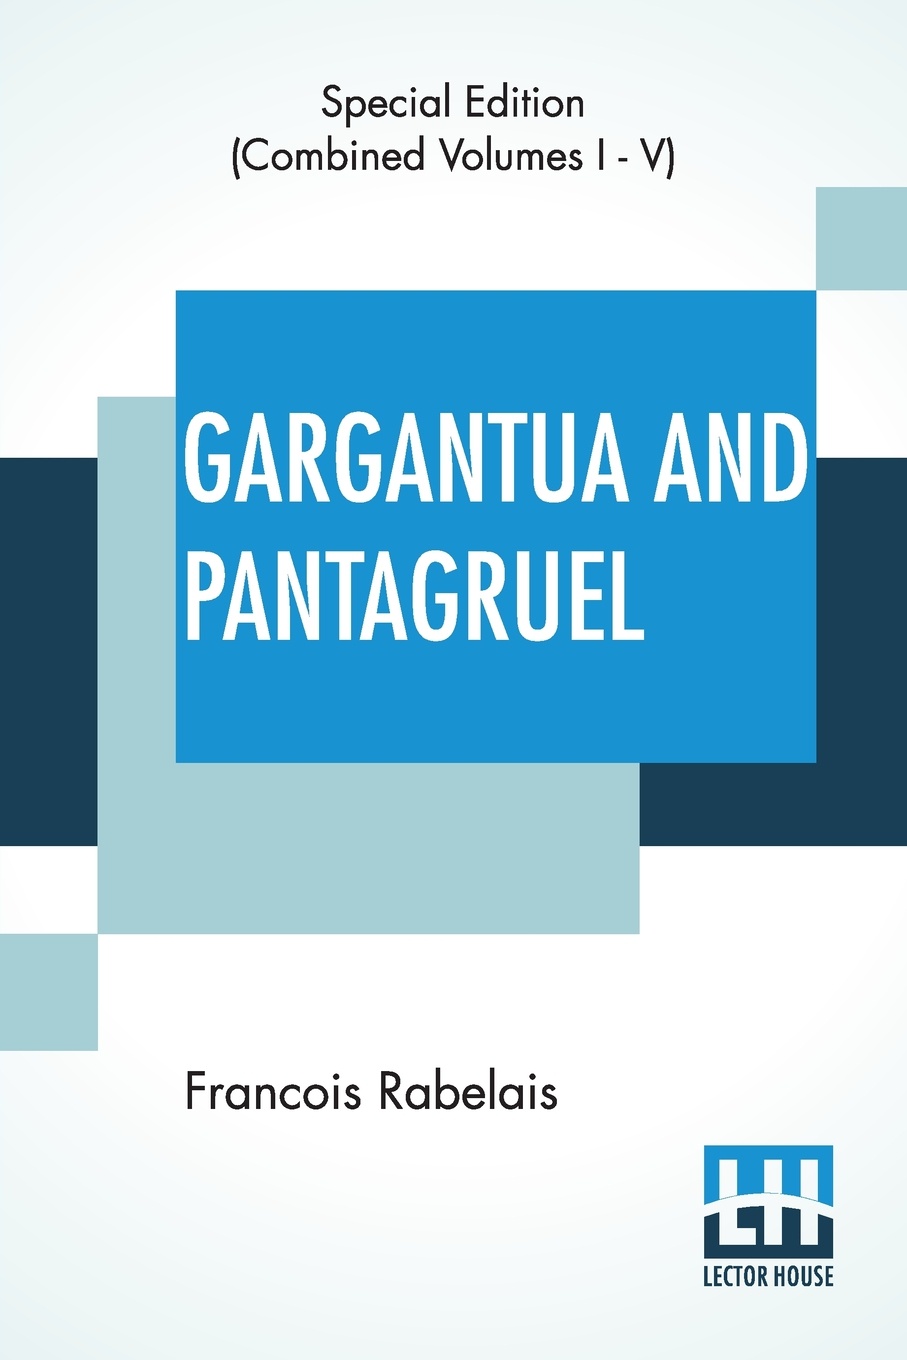 Gargantua And Pantagruel (Complete). Five Books Of The Lives, Heroic Deeds And Sayings Of Gargantua And His Son Pantagruel, Translated Into English By Sir Thomas Urquhart Of Cromarty And Peter Antony Motteux